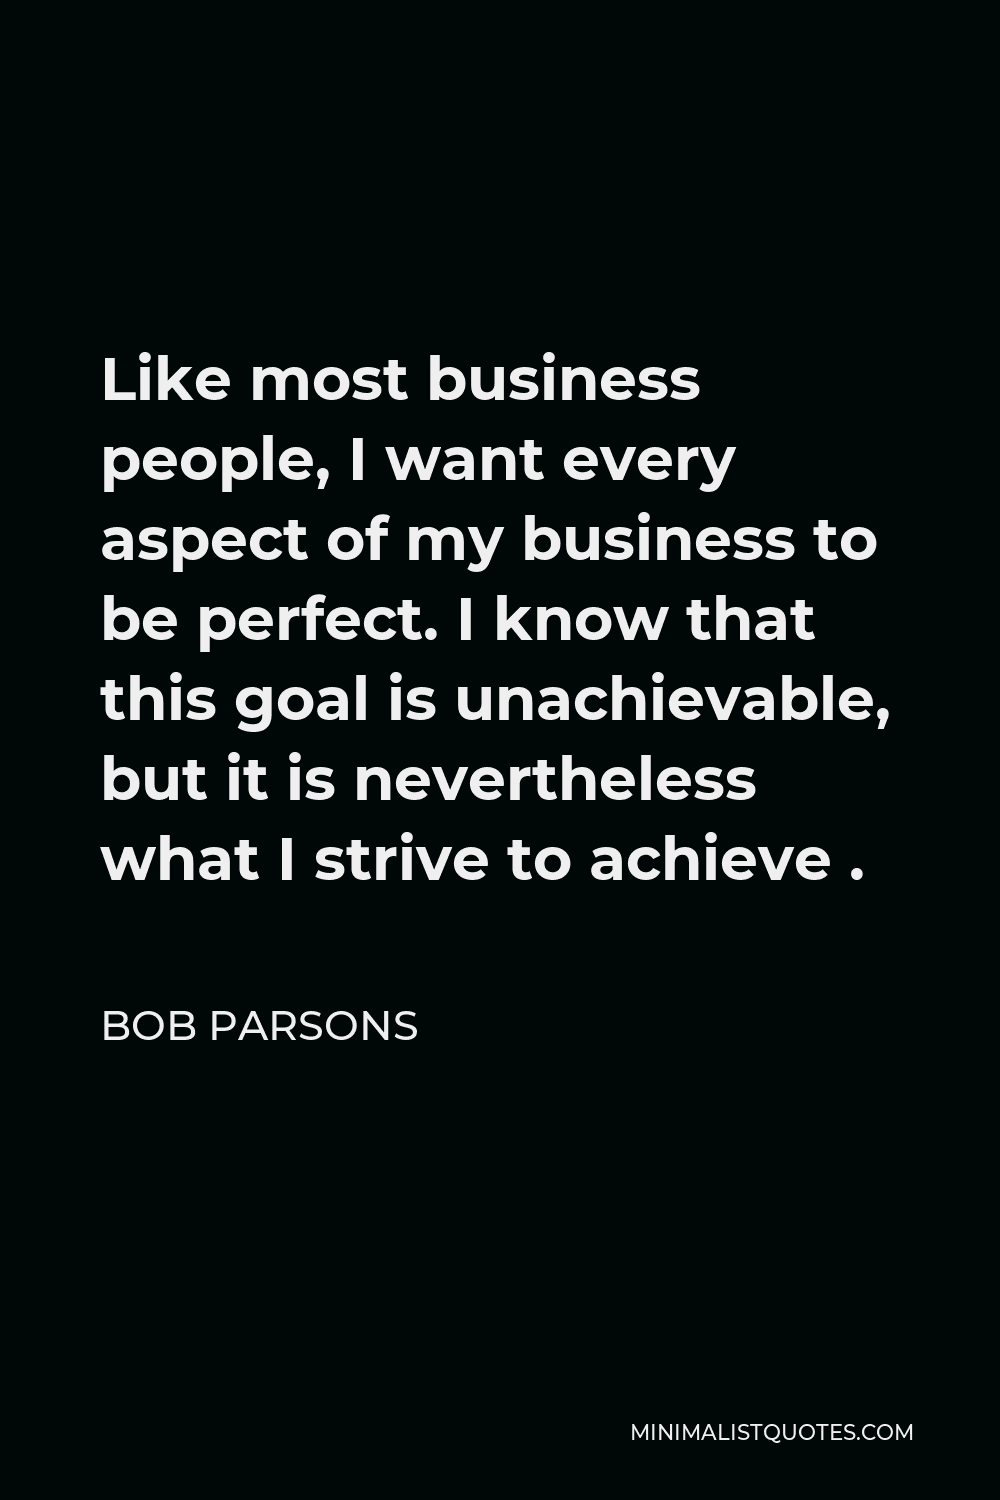 Bob Parsons Quote - Like most business people, I want every aspect of my business to be perfect. I know that this goal is unachievable, but it is nevertheless what I strive to achieve .